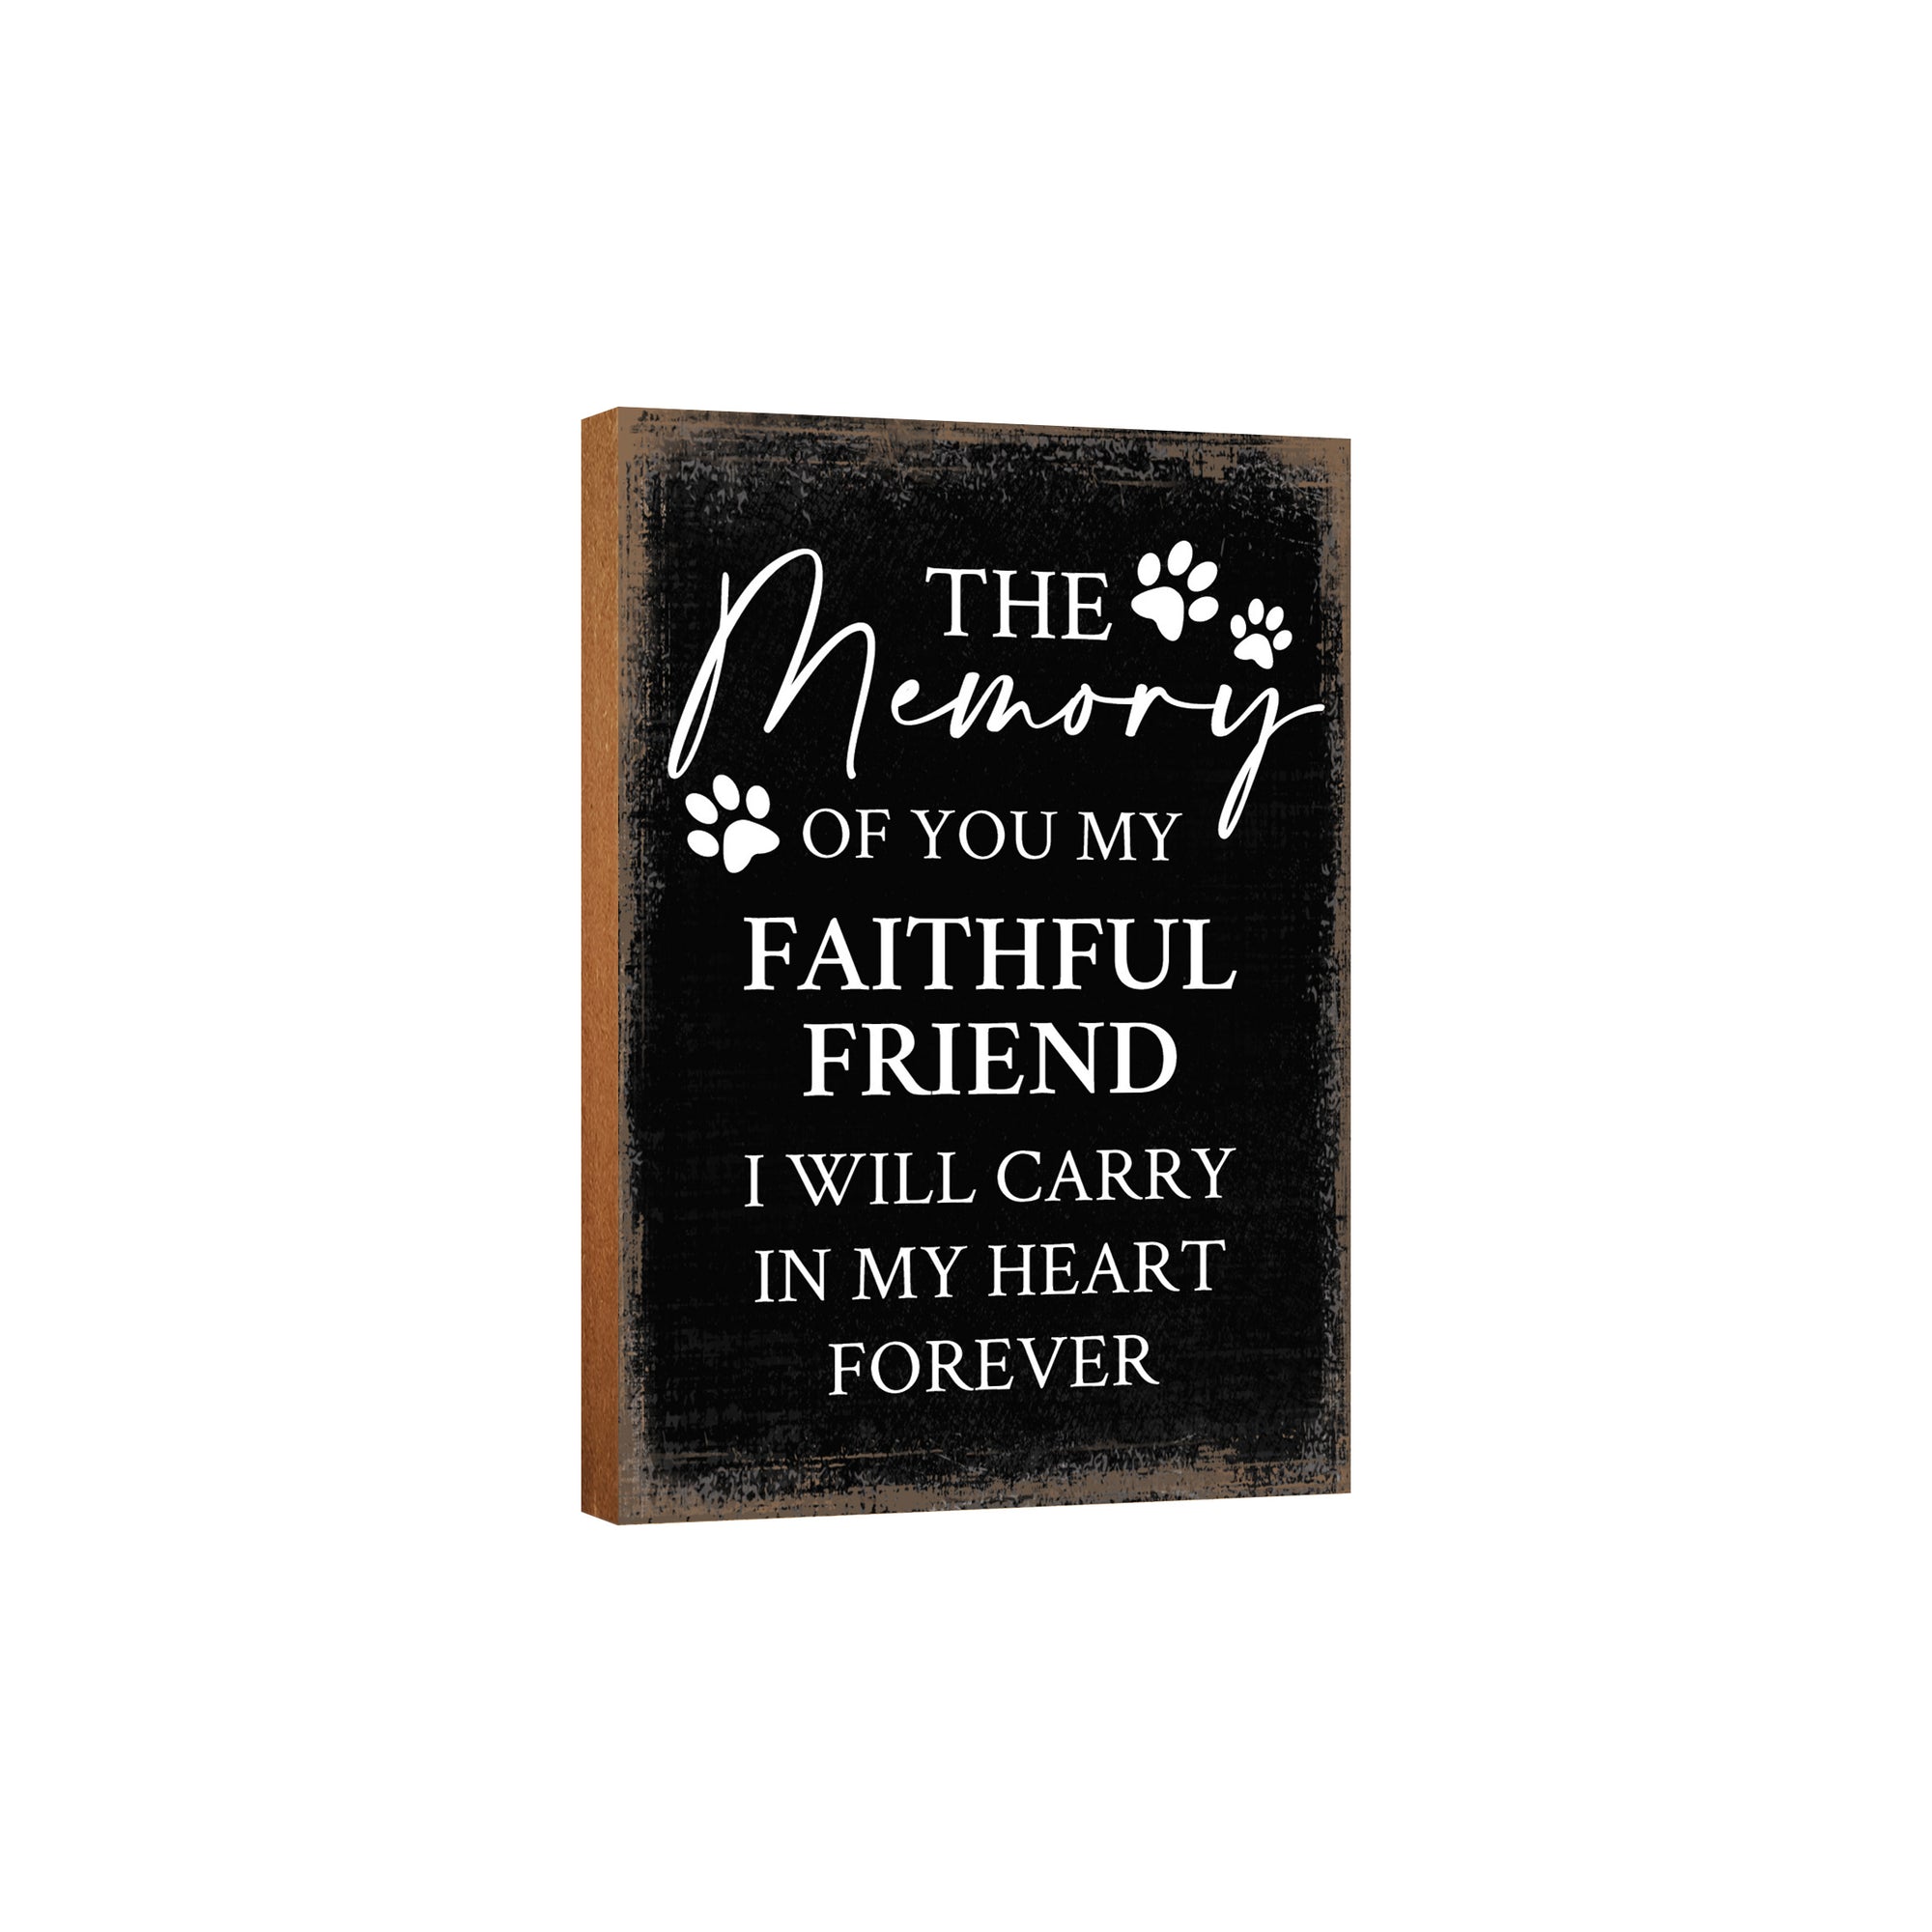 Wooden Shelf Decor and Tabletop Signs with Pet Verses - Forever In My Heart